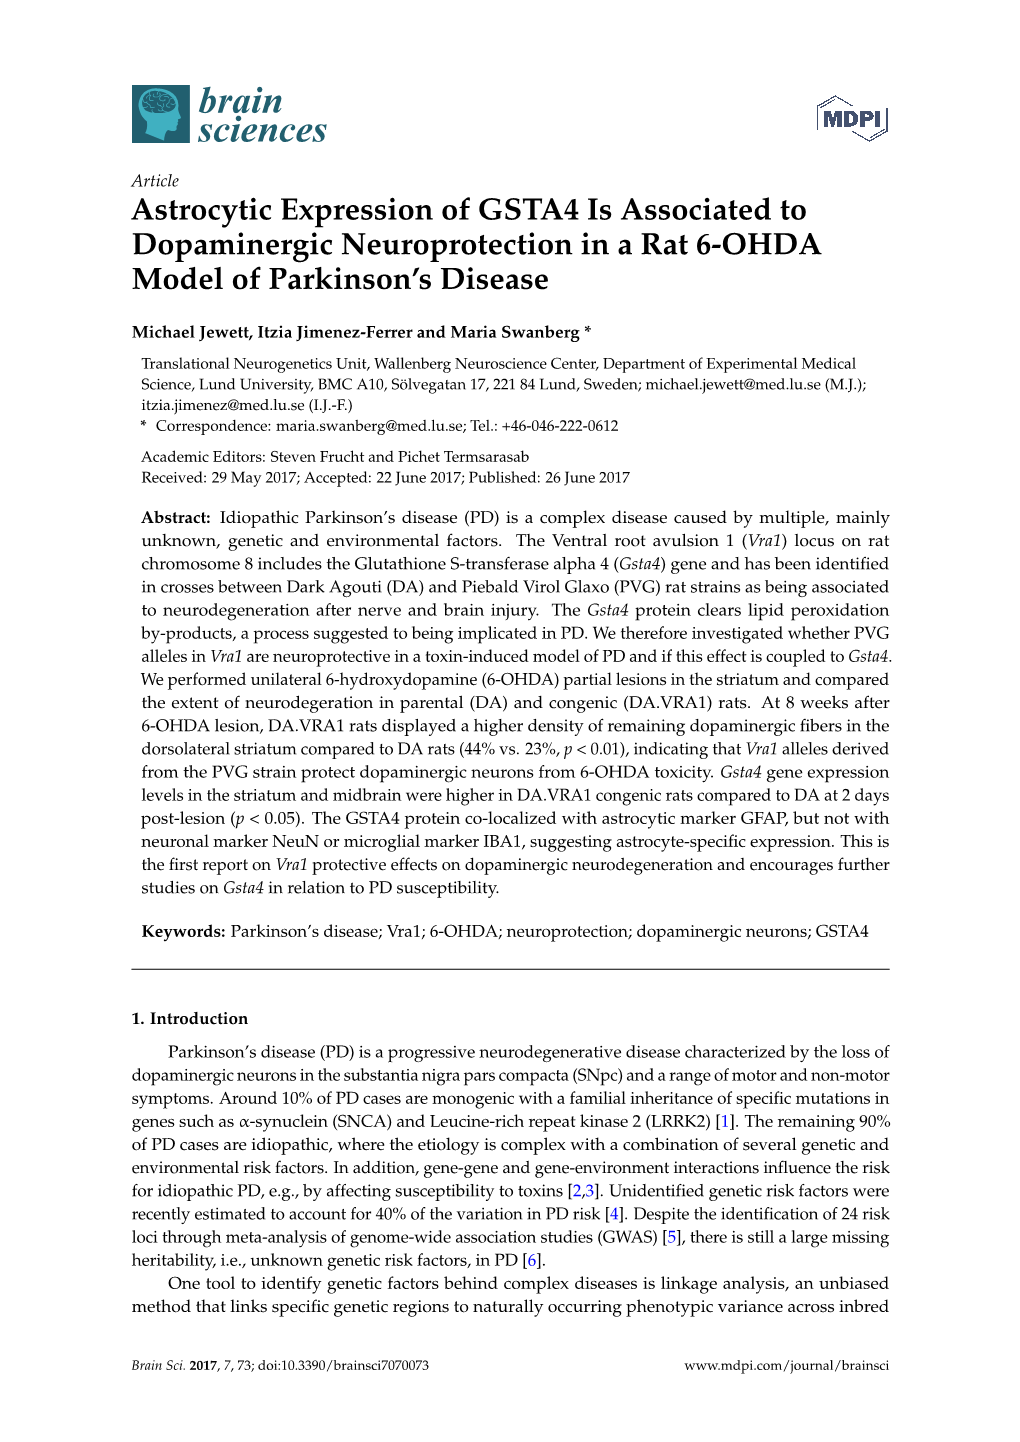 Astrocytic Expression of GSTA4 Is Associated to Dopaminergic Neuroprotection in a Rat 6-OHDA Model of Parkinson’S Disease